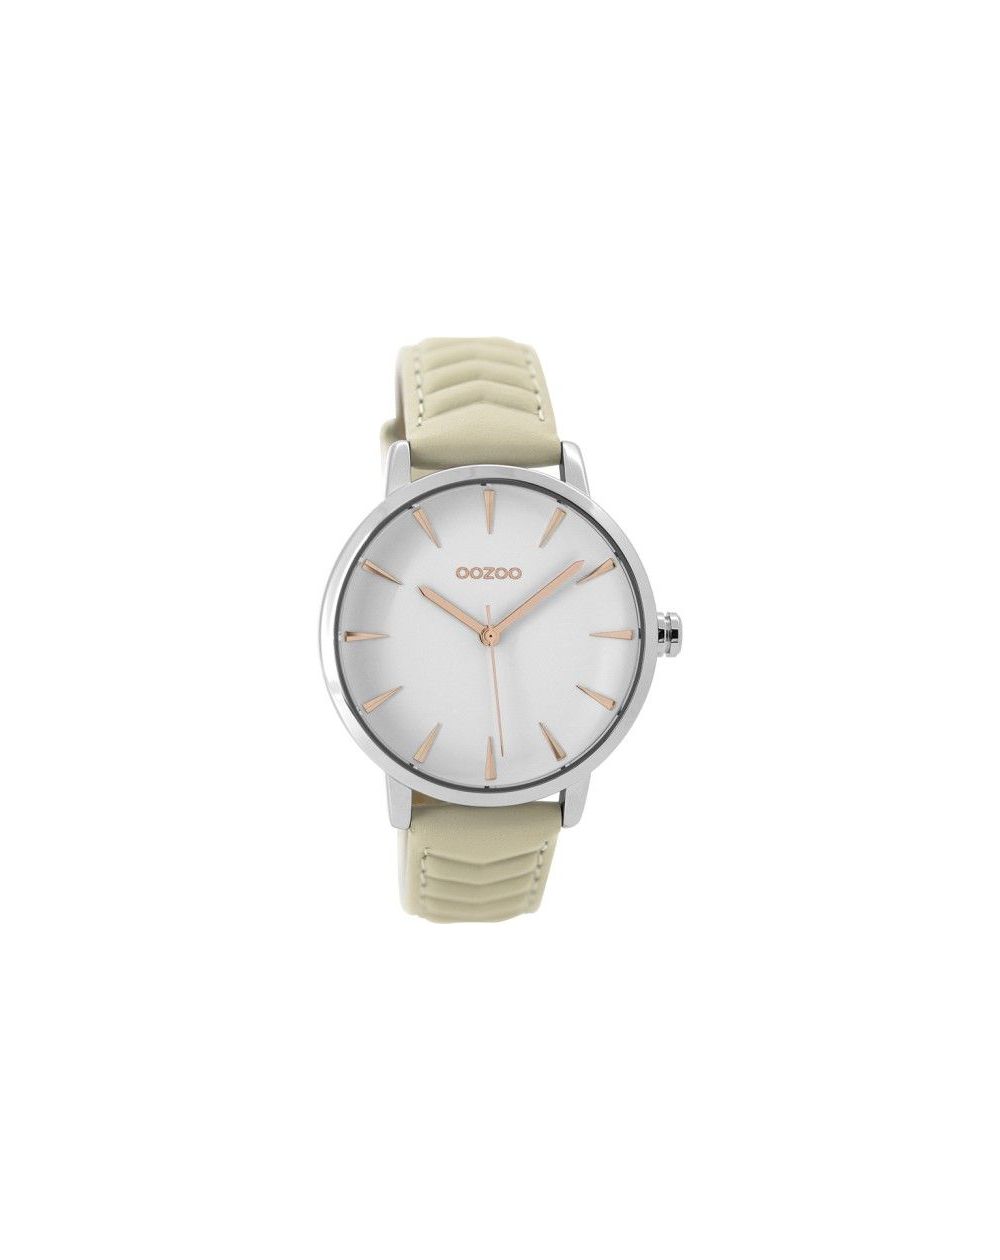 Montre Oozoo Timepieces C9505 Light sand/white - Marque montre Oozoo